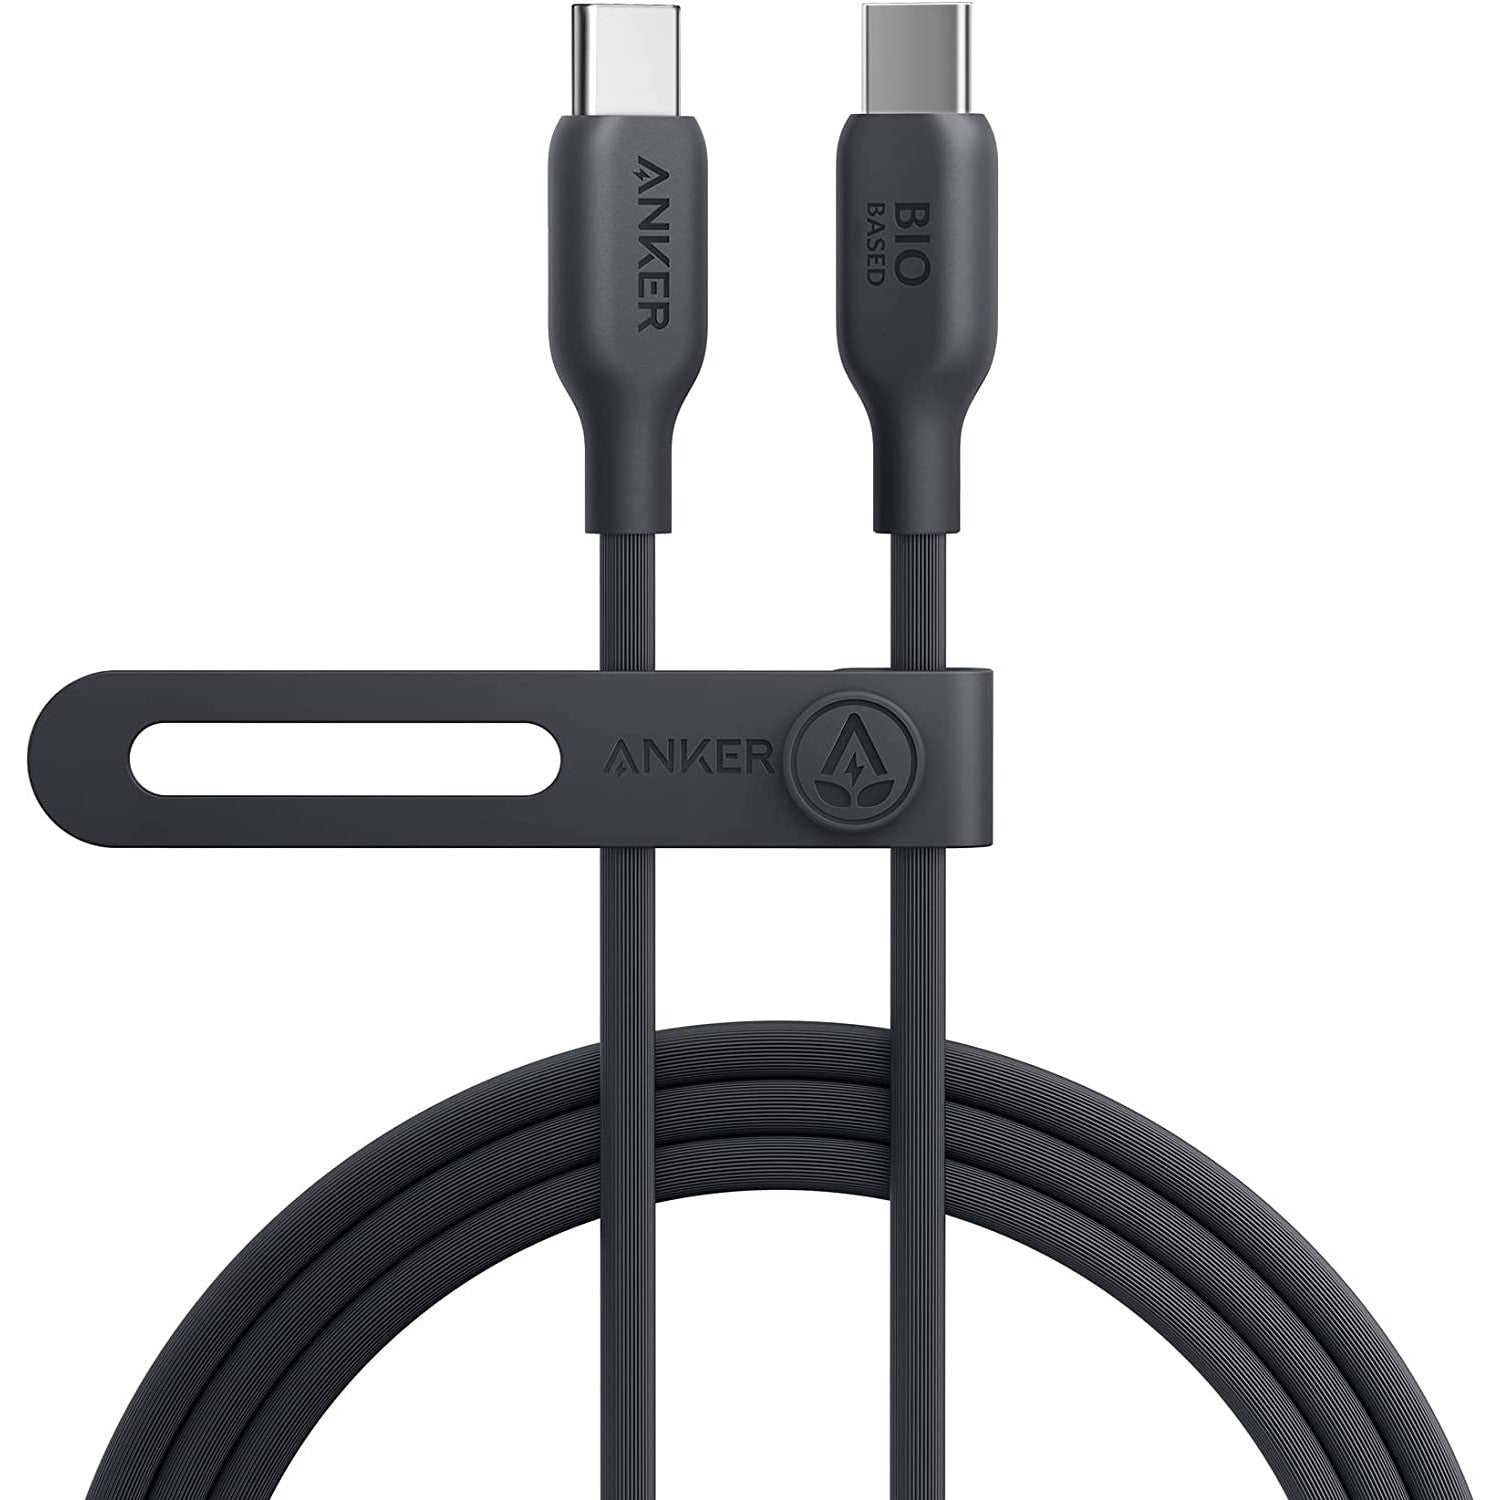 Anker 543 USB-C to USB-C 1.8m Charging Cable with 140W Charging Support (Eco Friendly) - Black